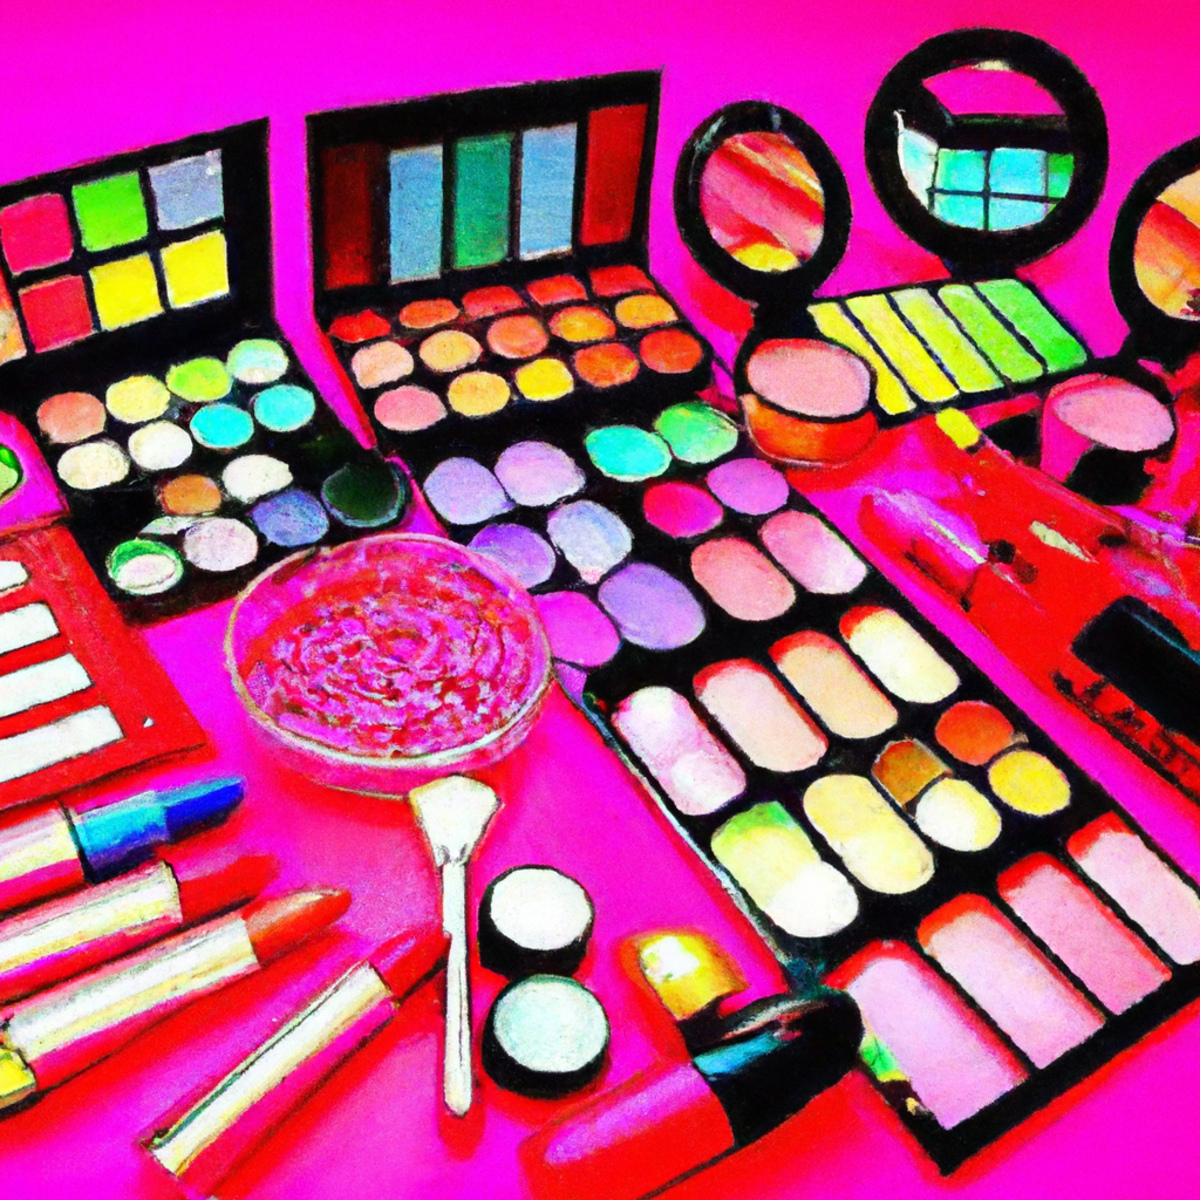 Vibrant neon makeup products arranged in a visually stunning composition, inviting readers to embrace the exciting world of neon.